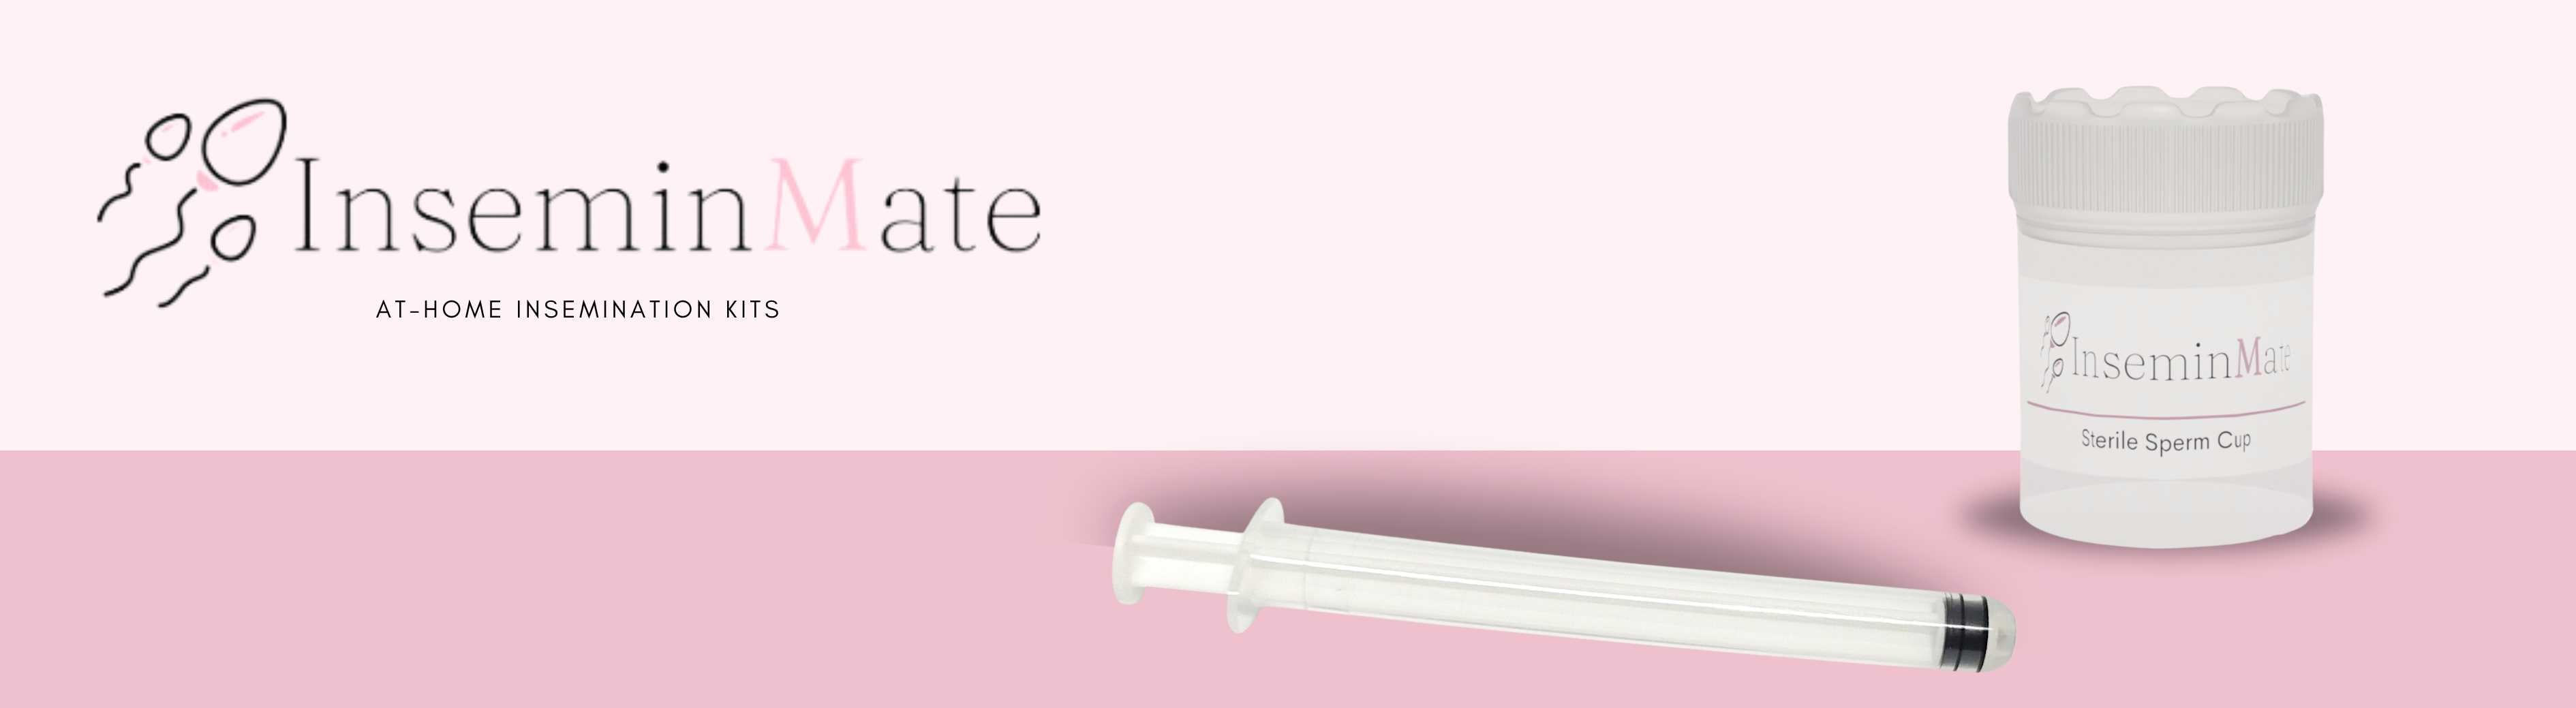 inseminmate provides at home insemination kits for becoming pregnant in the comfort of your own home